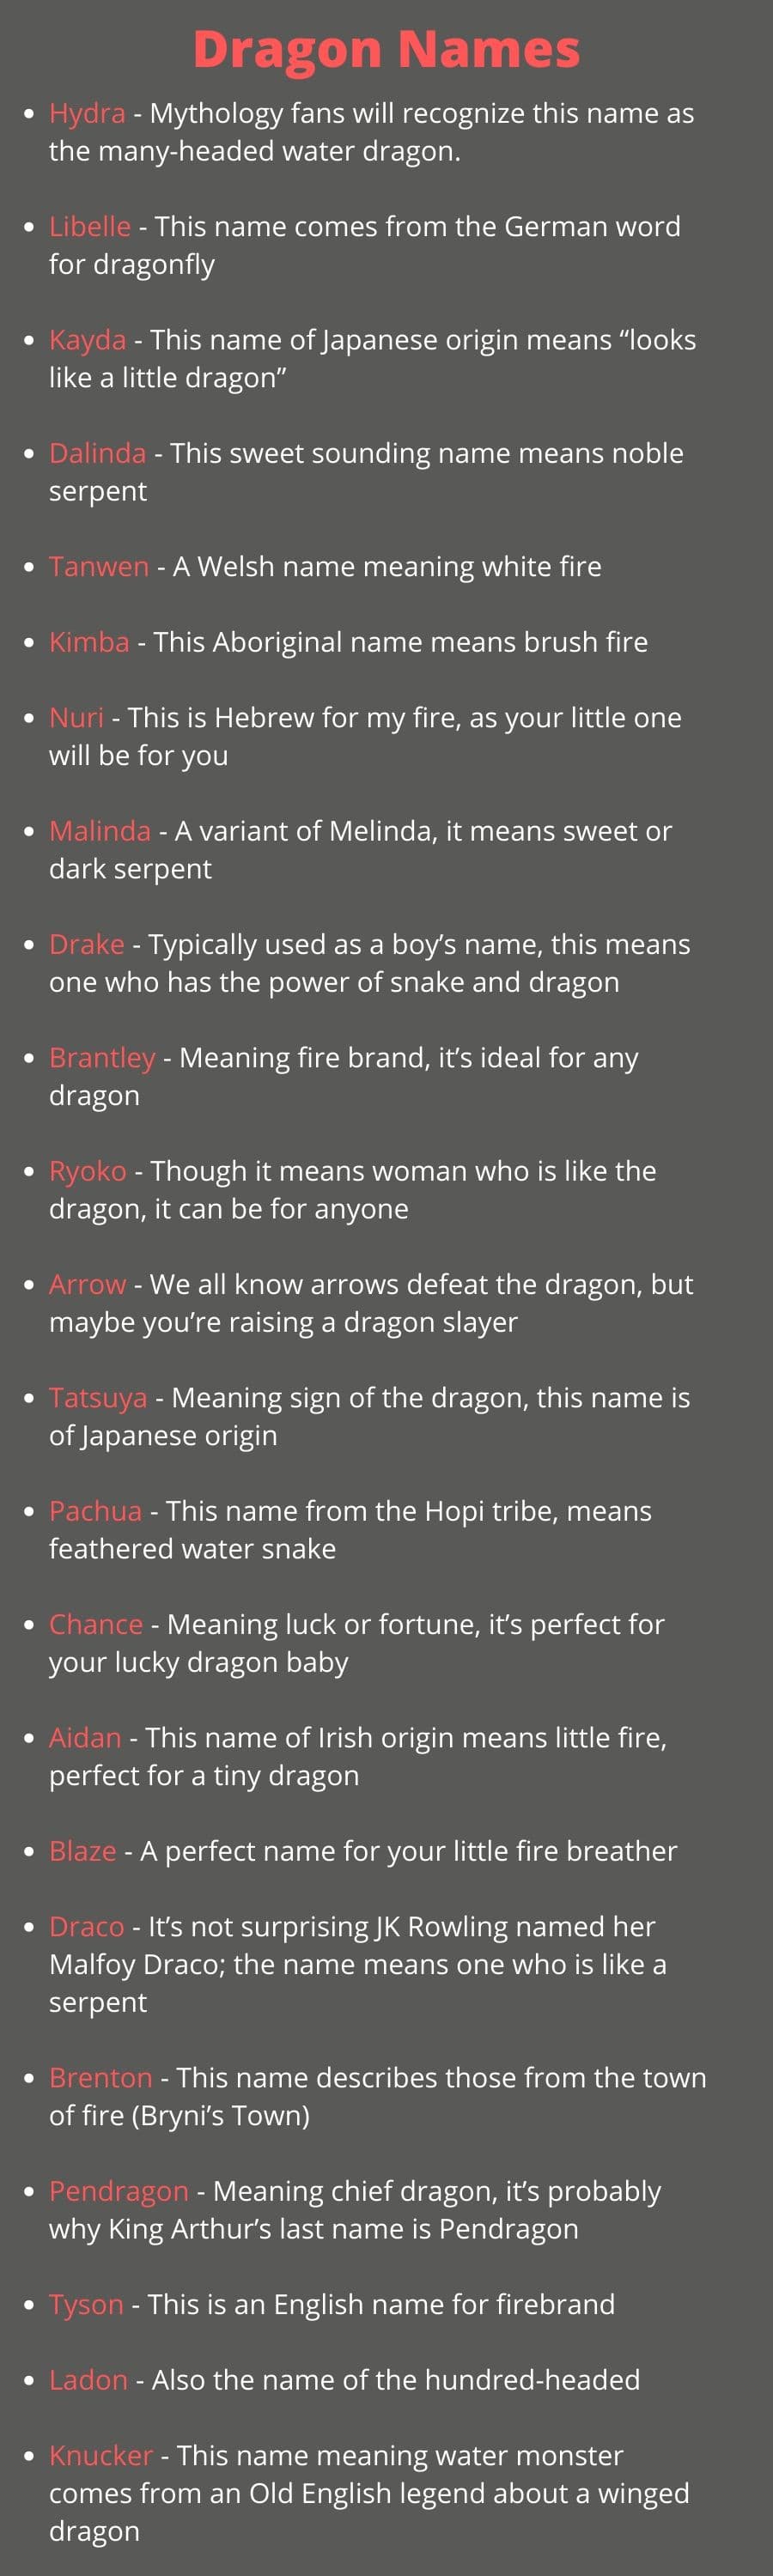 400 Dragon Names That are Most Used in Fantasy Books